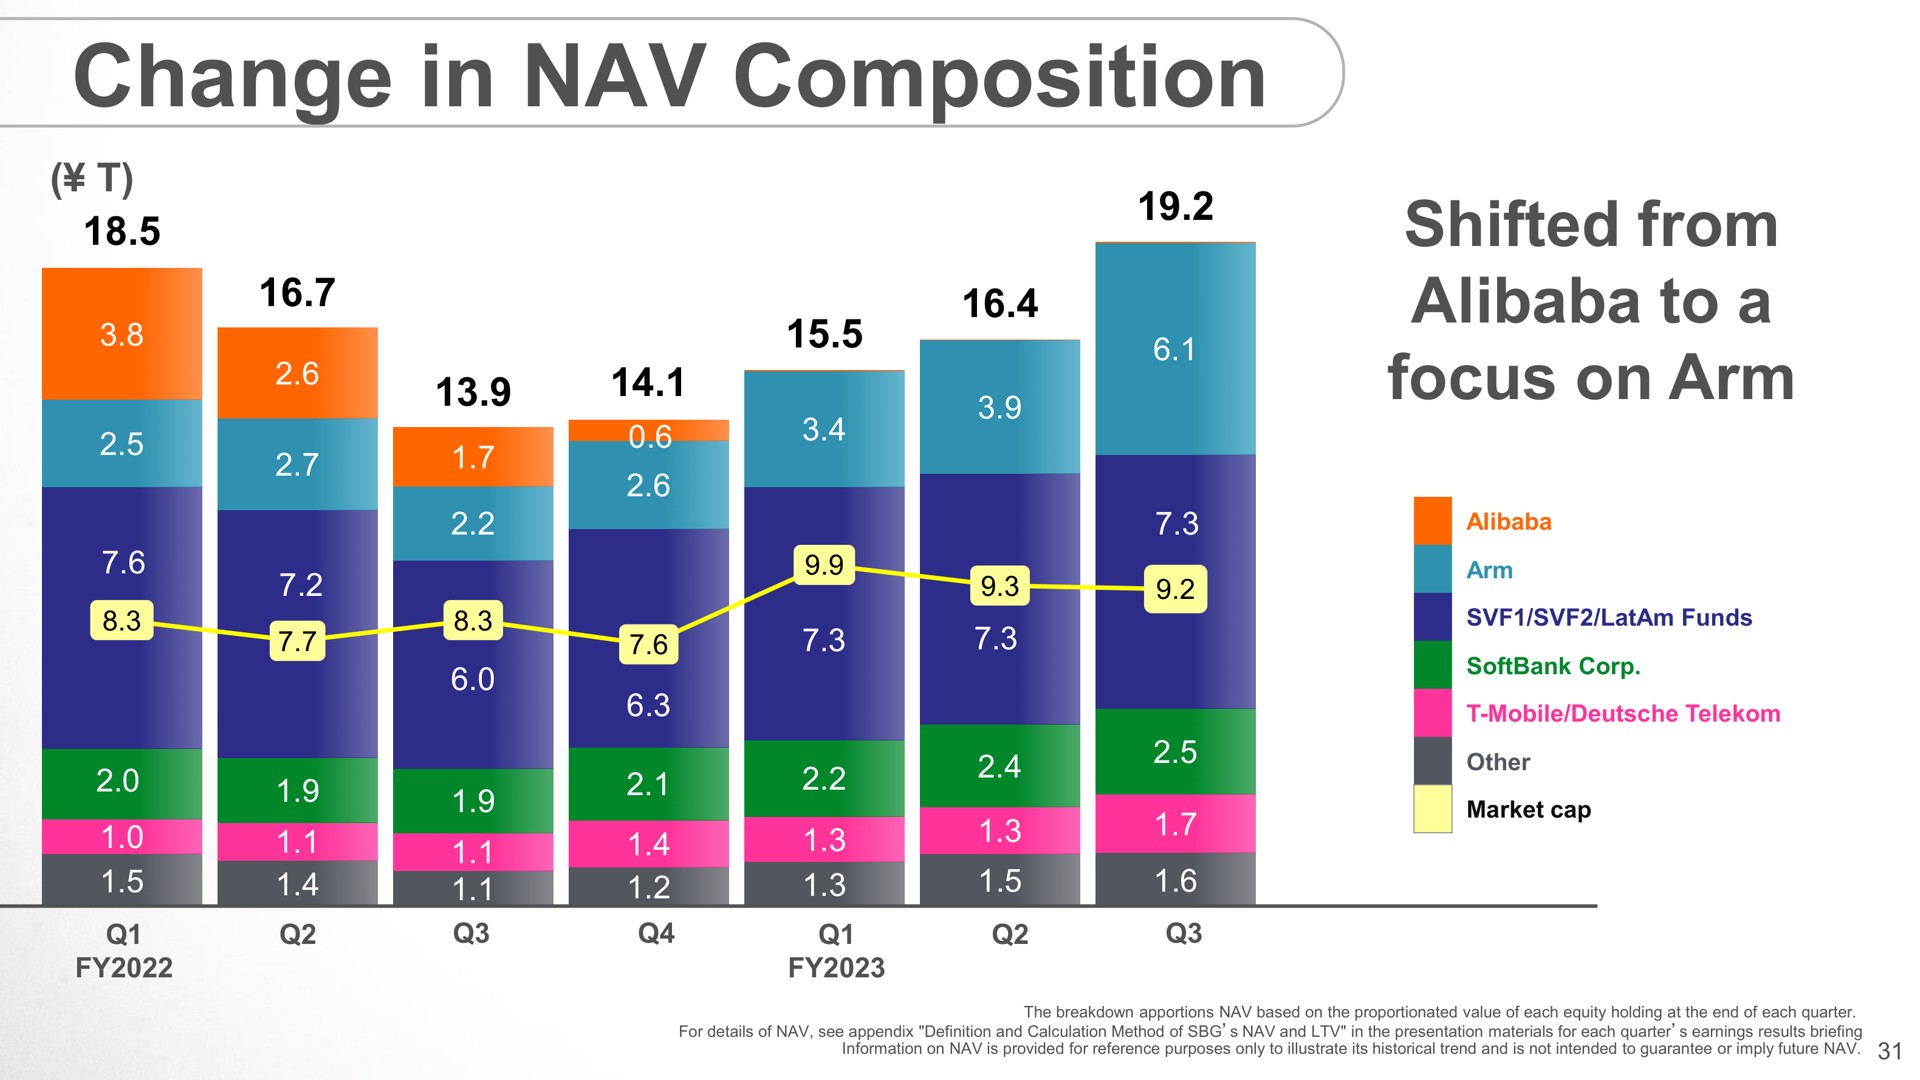 change in composition shifted from to a focus on arm | SoftBank